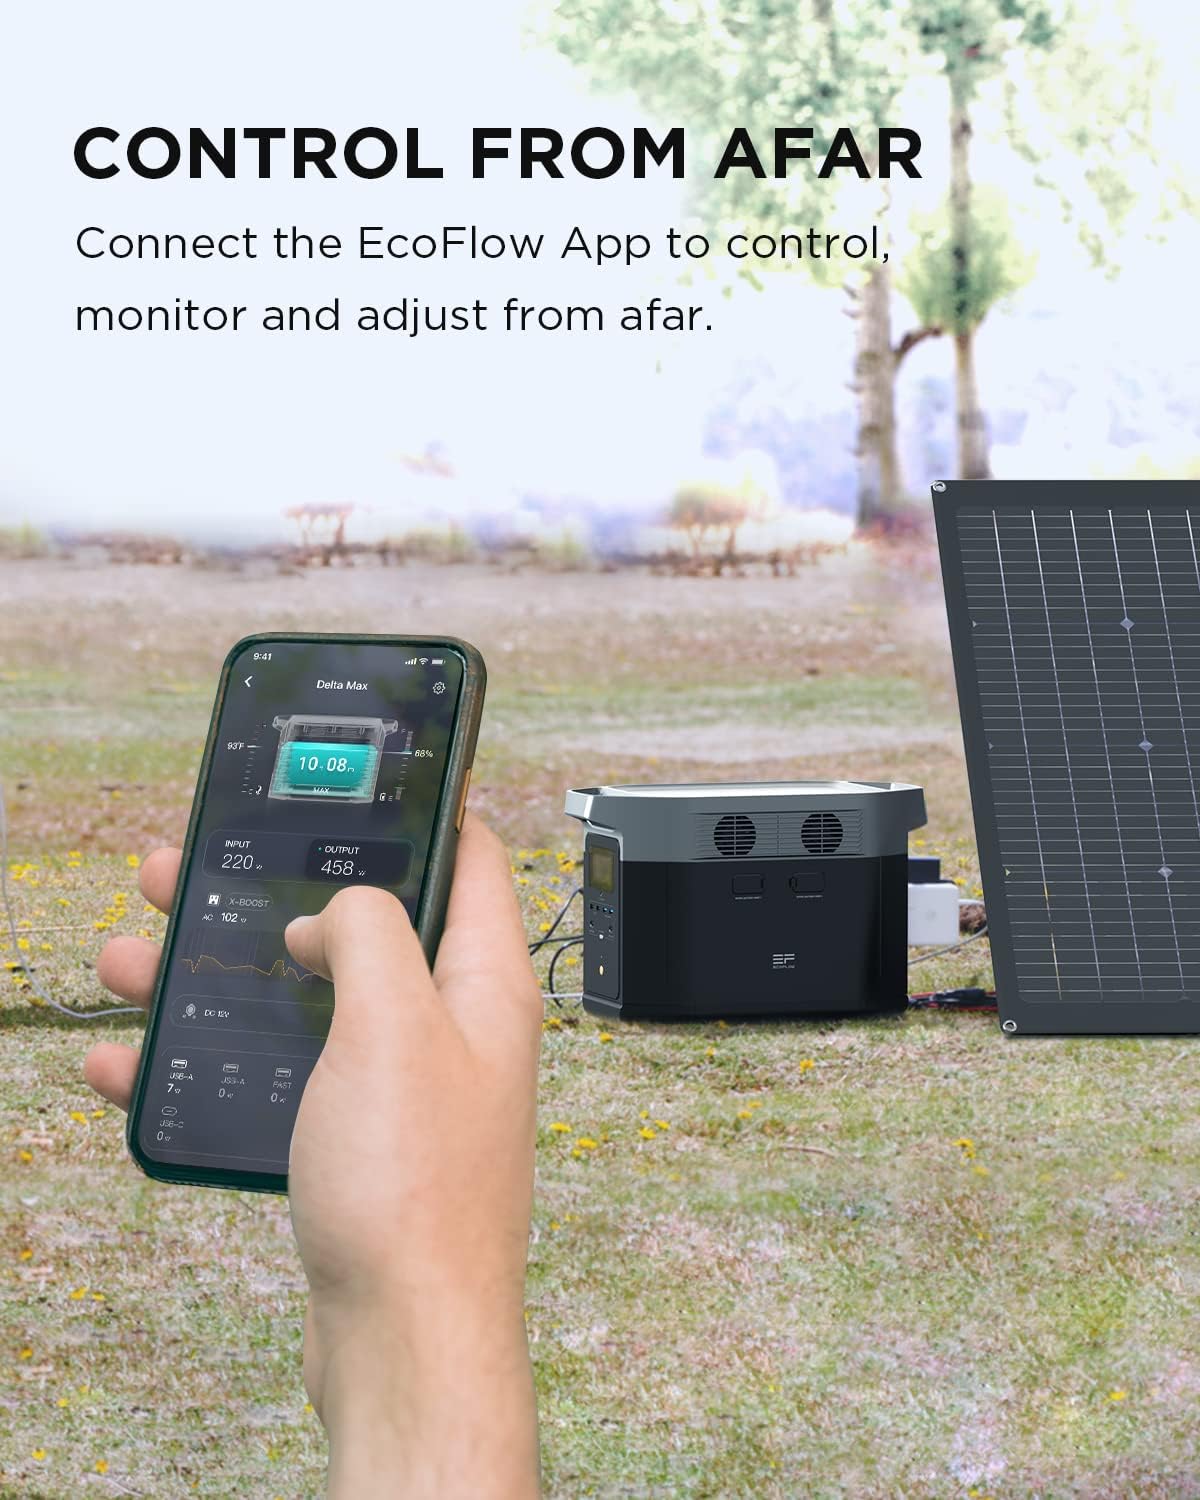 Professional Title: "High-Capacity Solar Generator DELTA Max (2000) 2016Wh with Powerful 220W Solar Panel, 6 X 2400W (5000W Surge) AC Outlets, Portable Power Station for Home Backup, Outdoor Adventures, Camping, RV, and Emergency Situations"